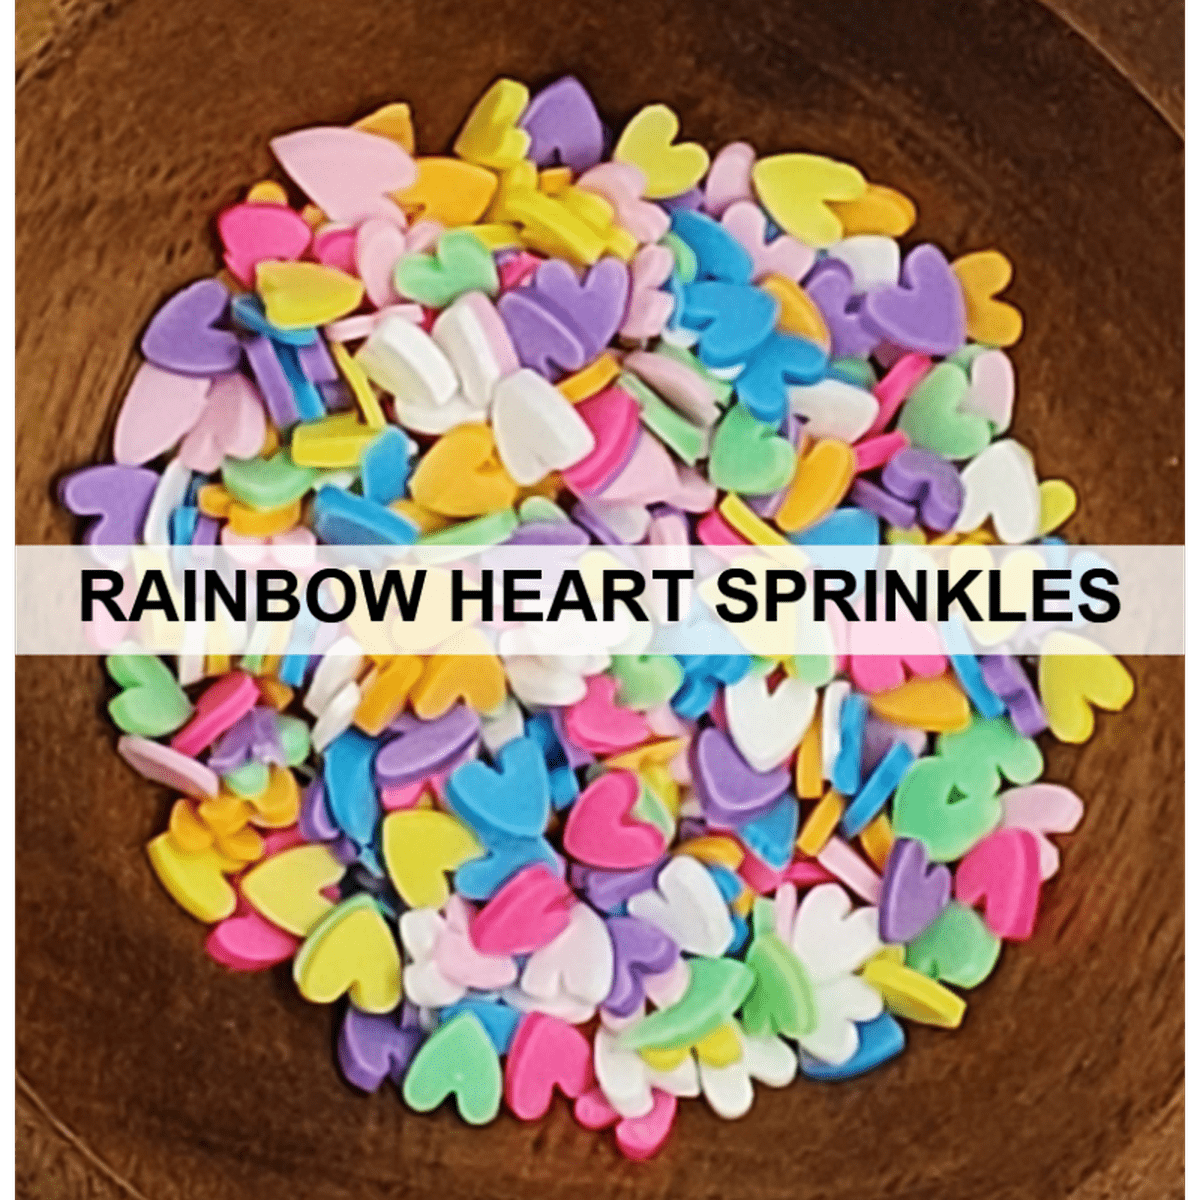 Rainbow Heart Sprinkles by Kat Scrappiness - Kat Scrappiness